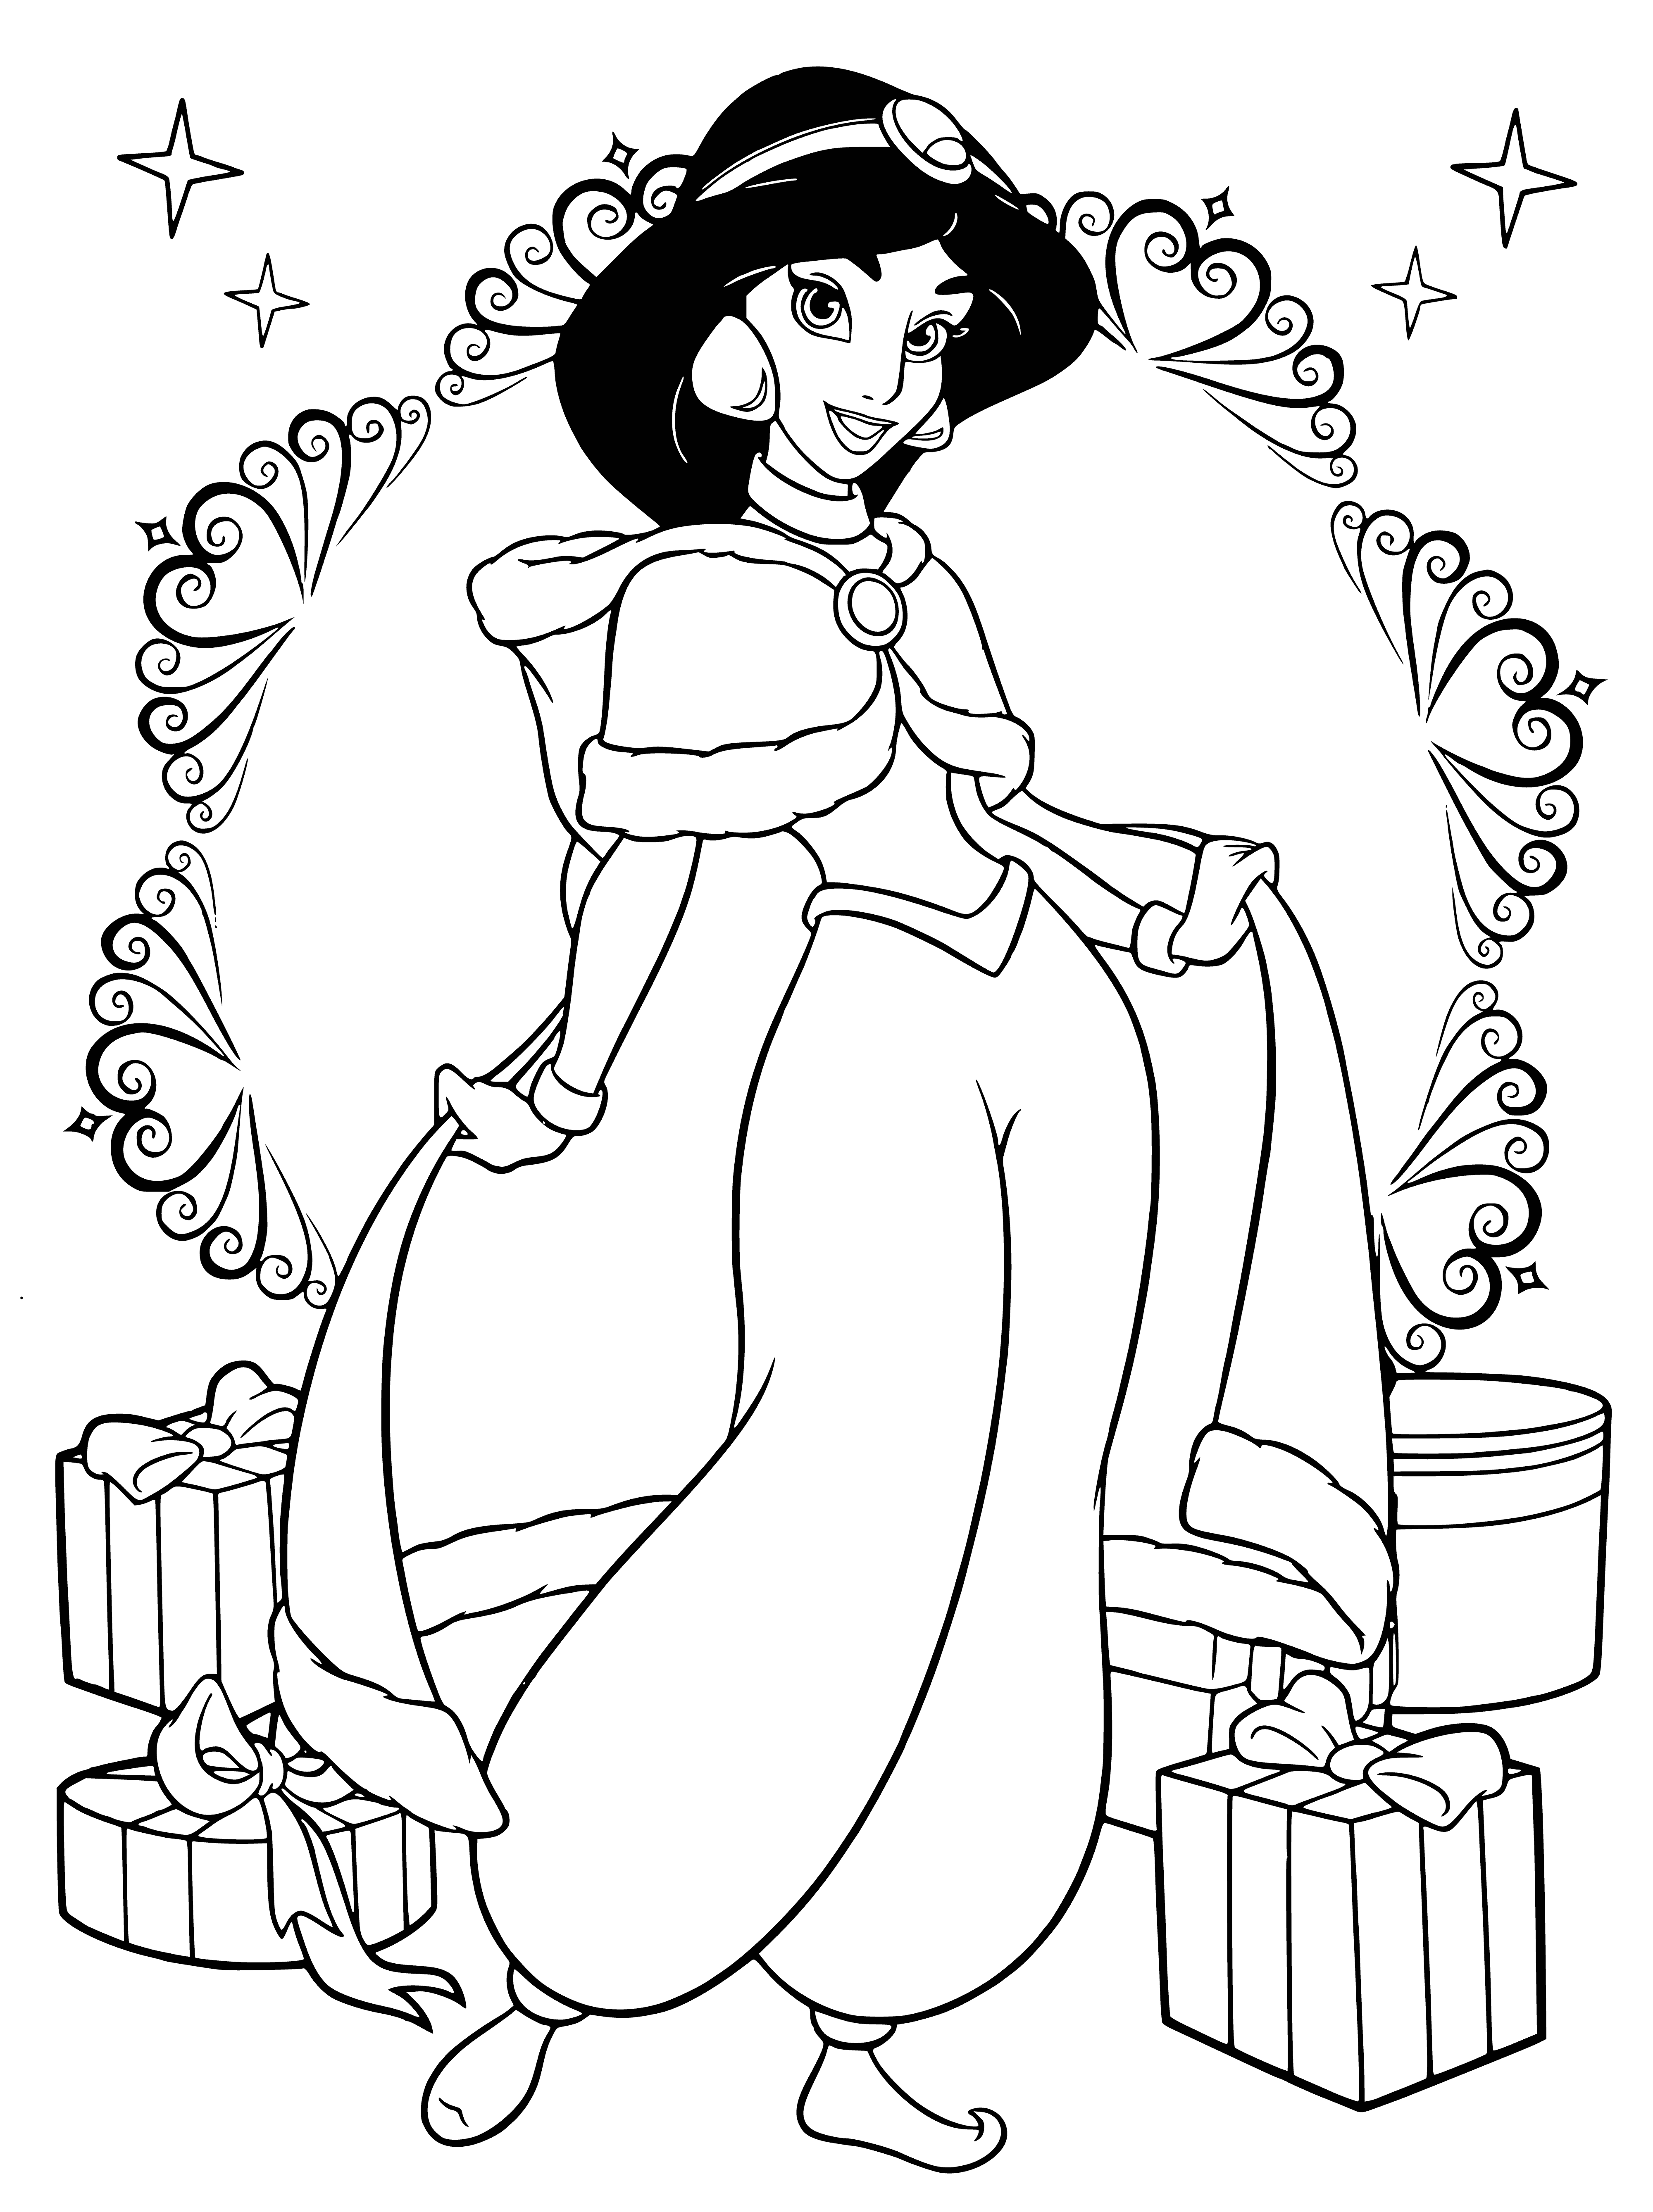 Jasmine with New Year's gifts coloring page